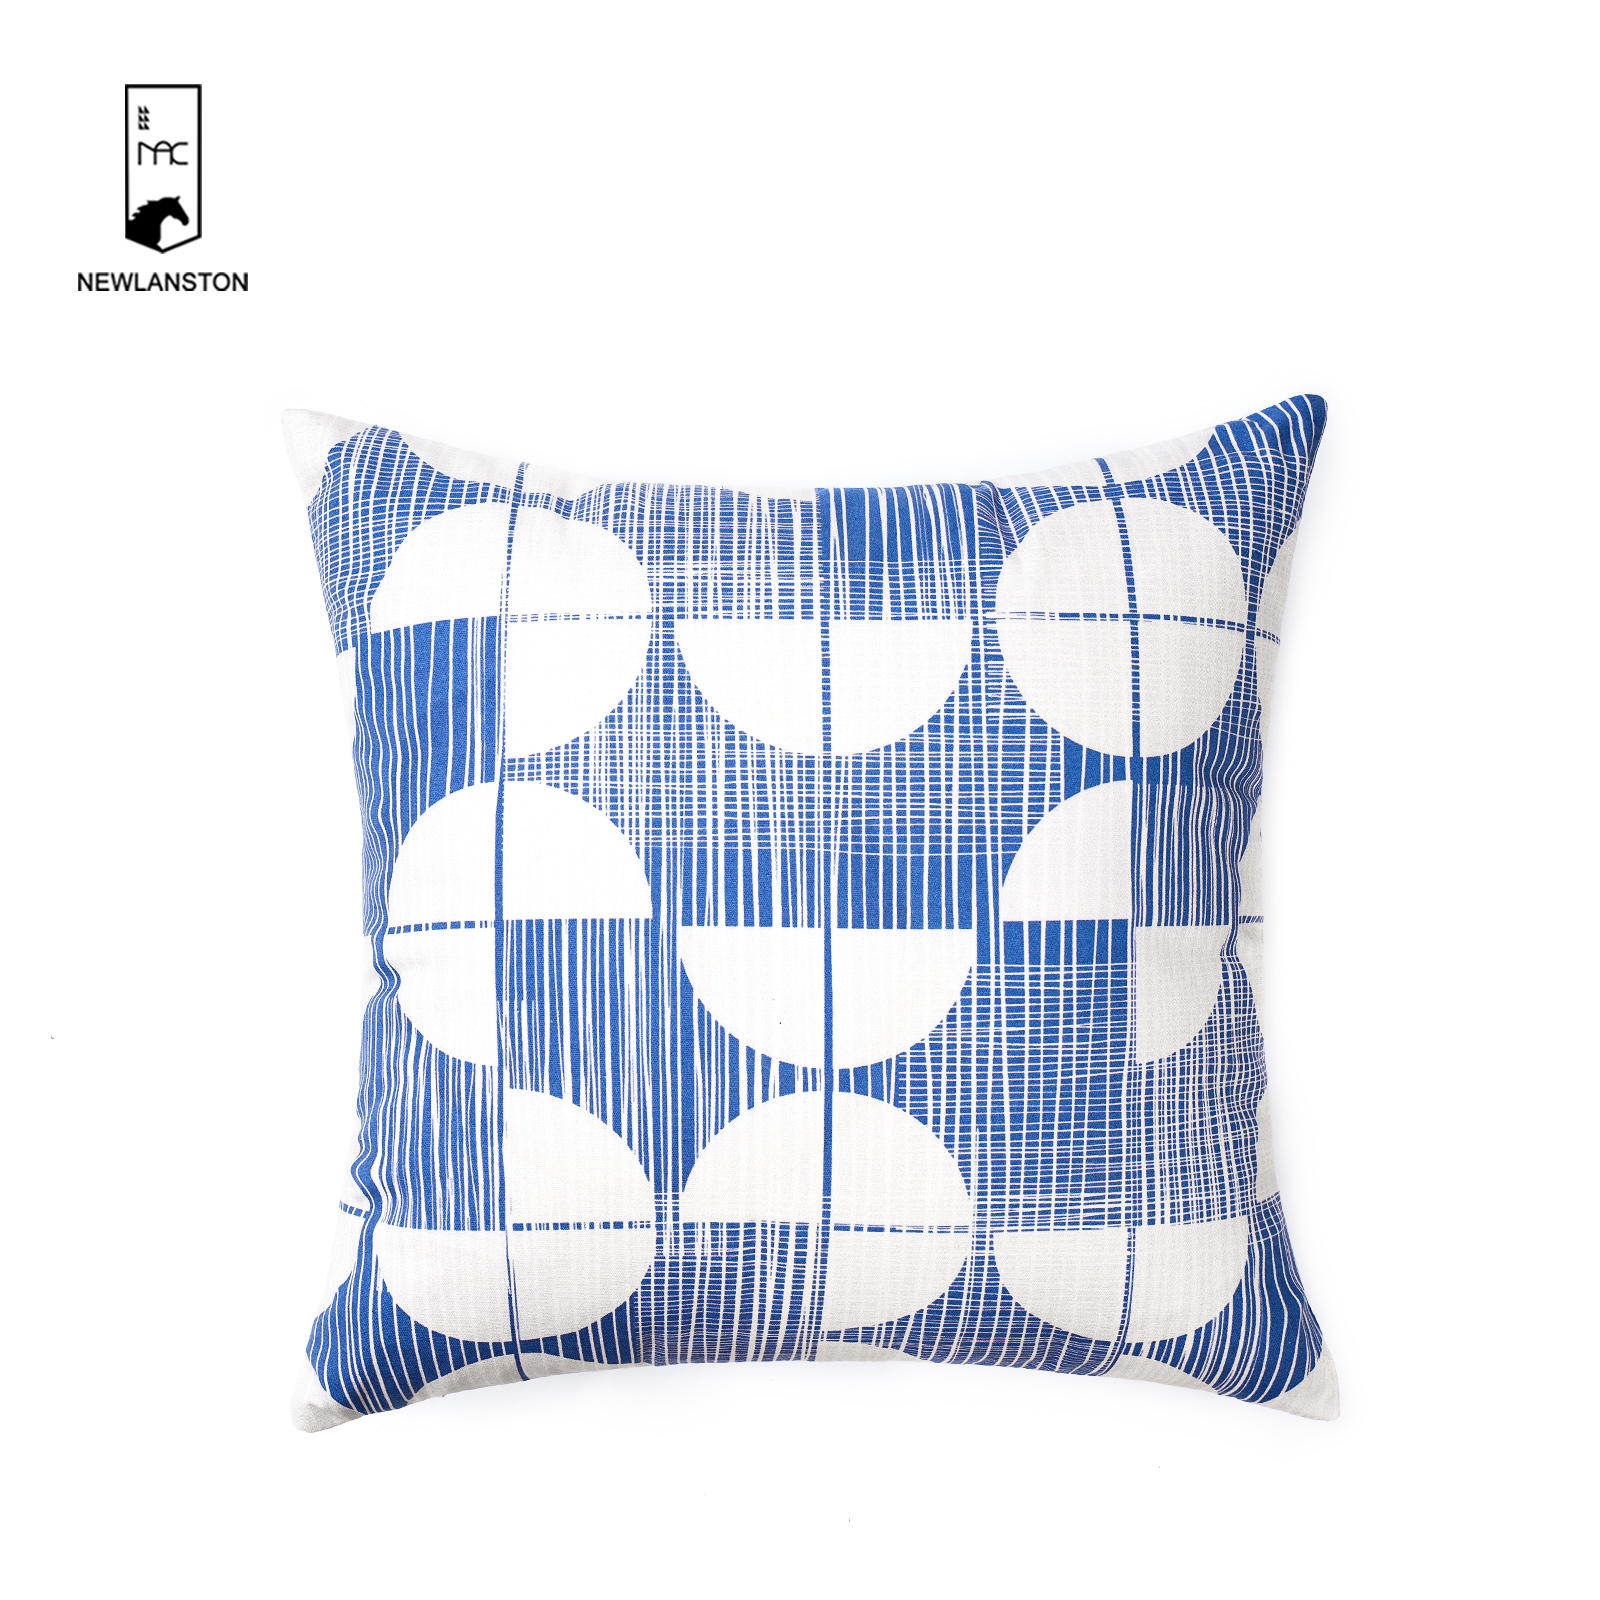 45x45 Digital printed recycled cotton Geometric Cushion/Pillow cover 